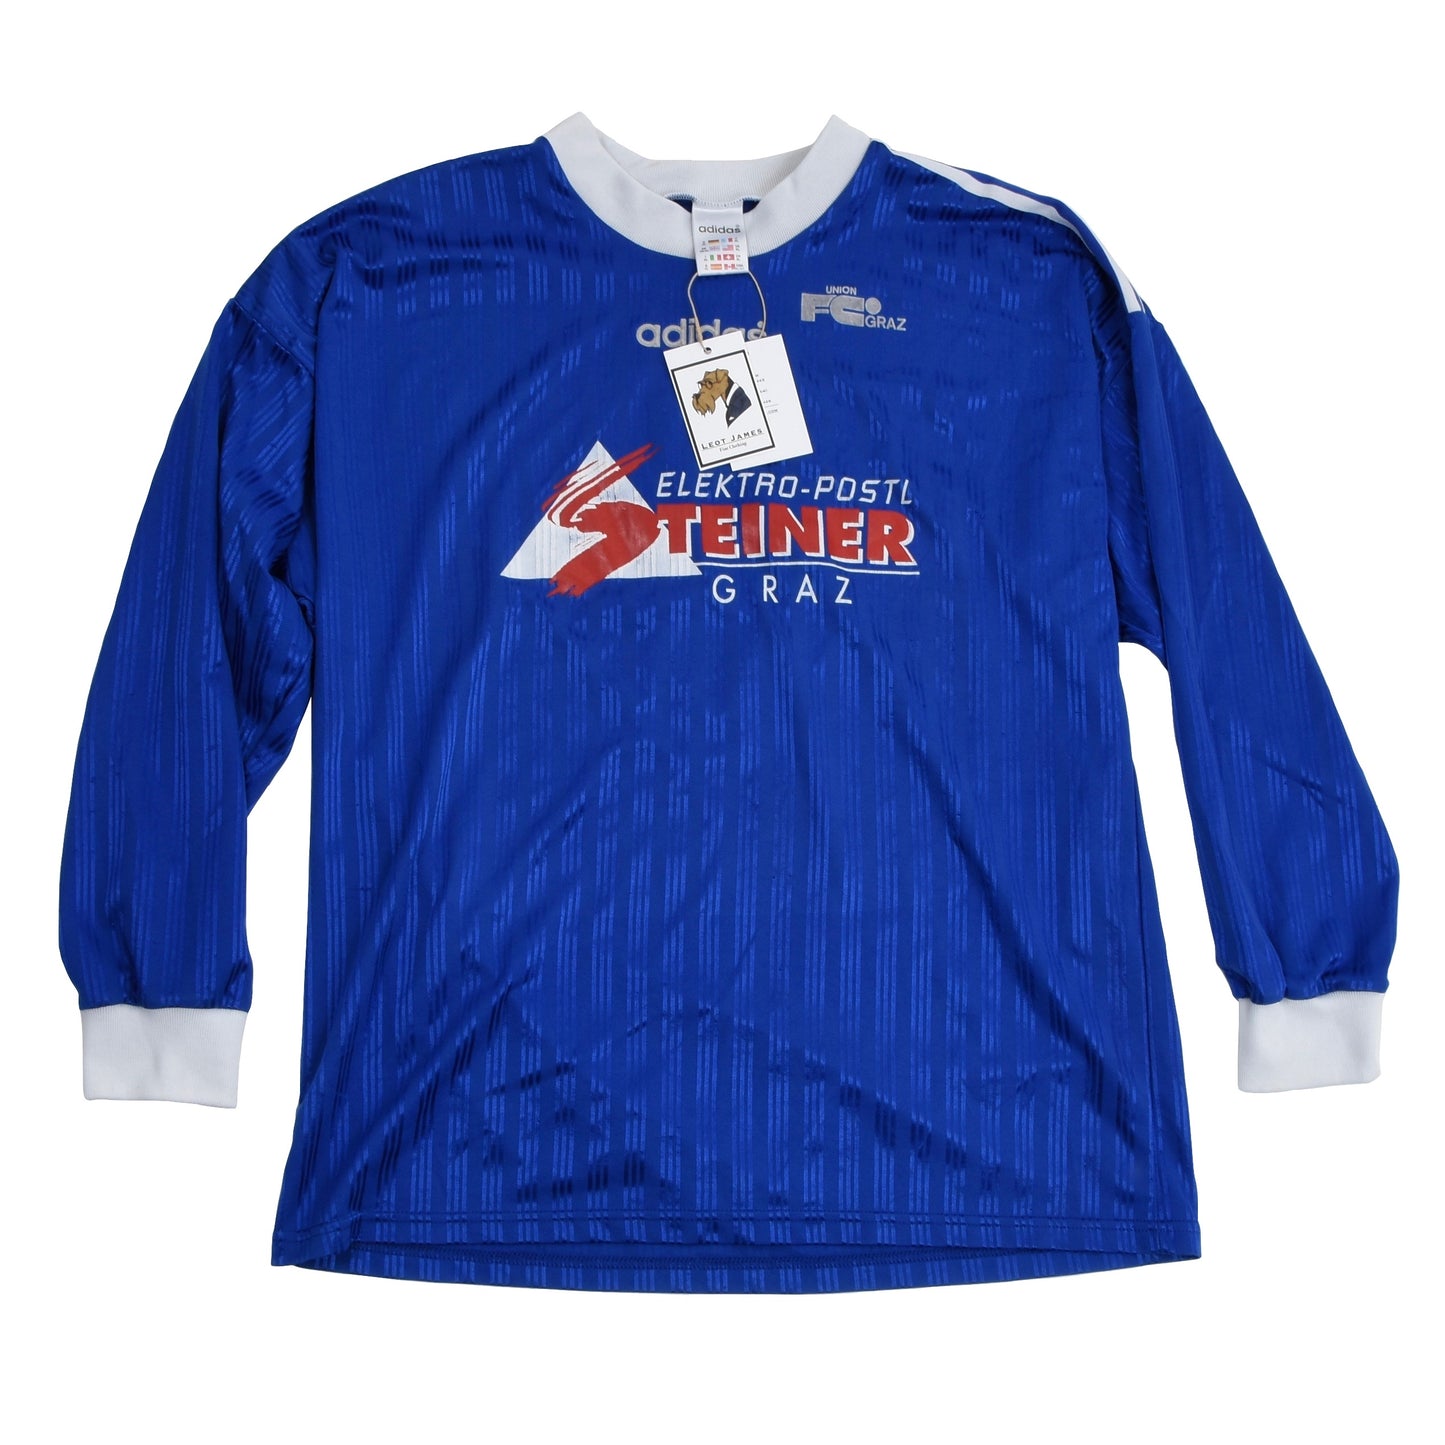 Vintage Adidas Long-Sleeved Jersey Size XL #8 - Blue